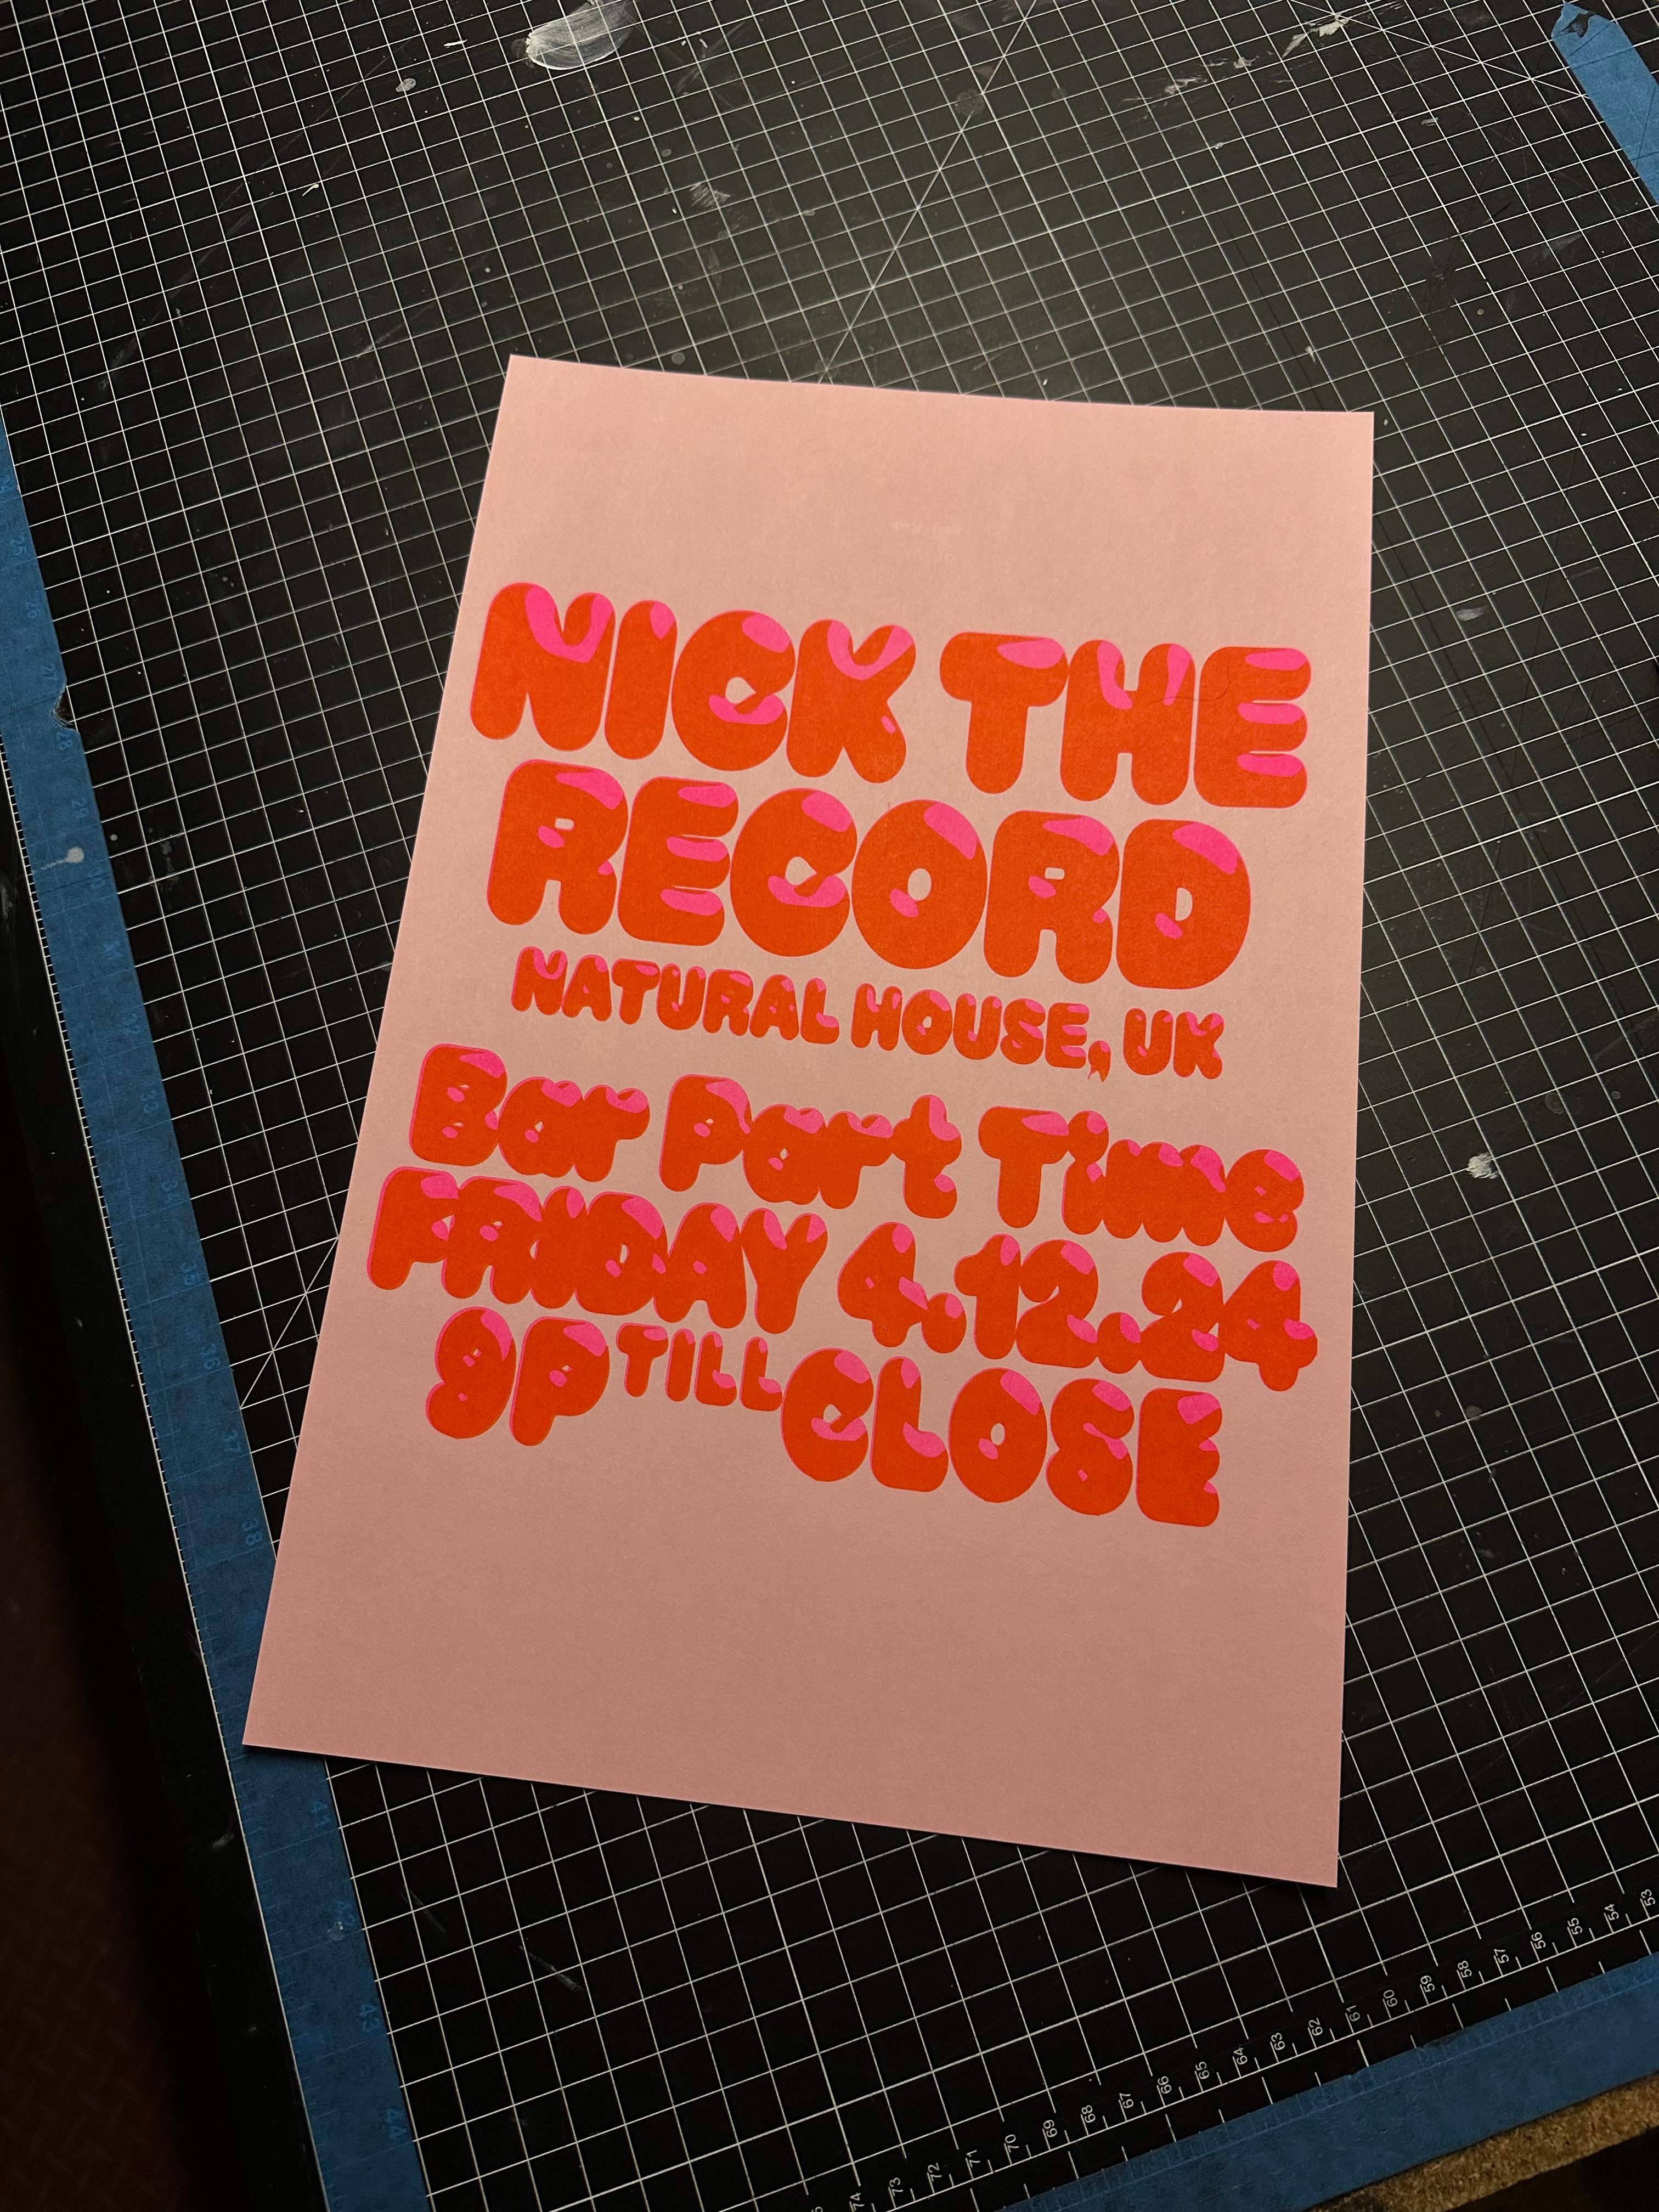 Nick The Record (Natural House, Tangent UK) at B.P.T - フライヤー裏